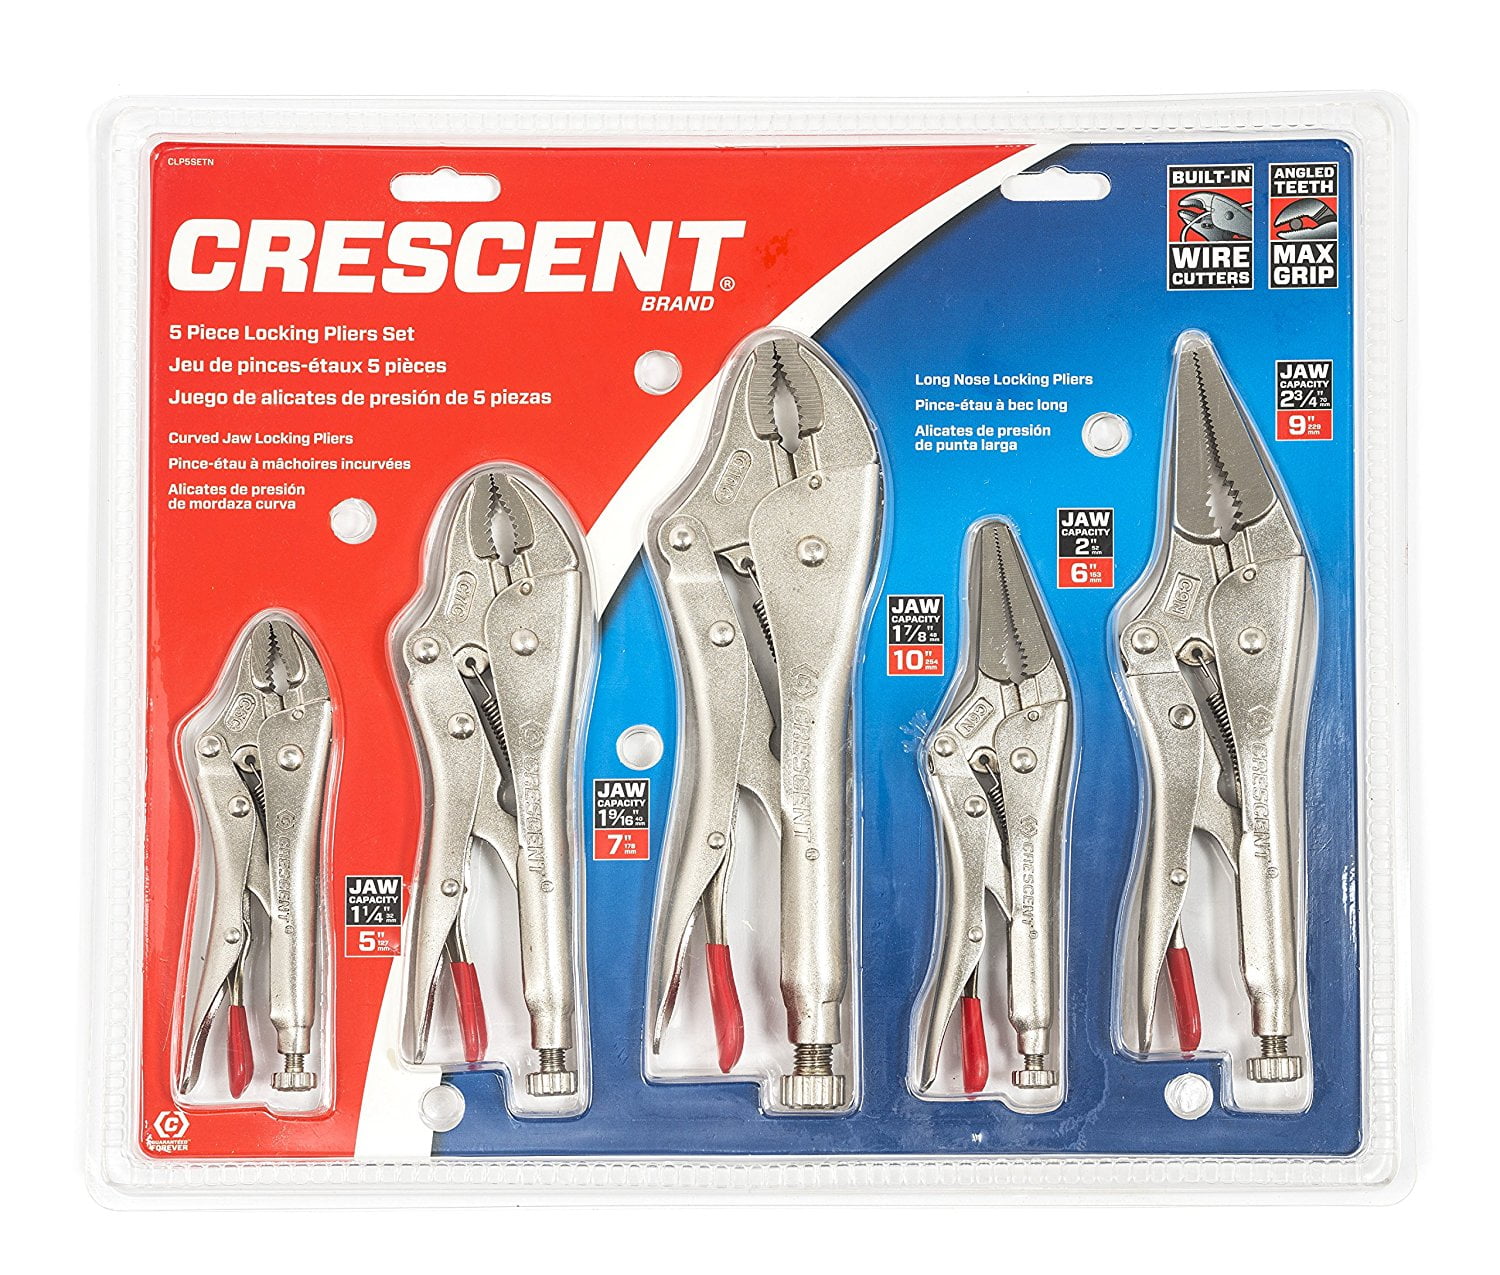 Curved Jaw W/Wire Cutter; Carded; Nickel-Plated Crescent; Tool; Locking Pliers; 7 In Pack of 2 